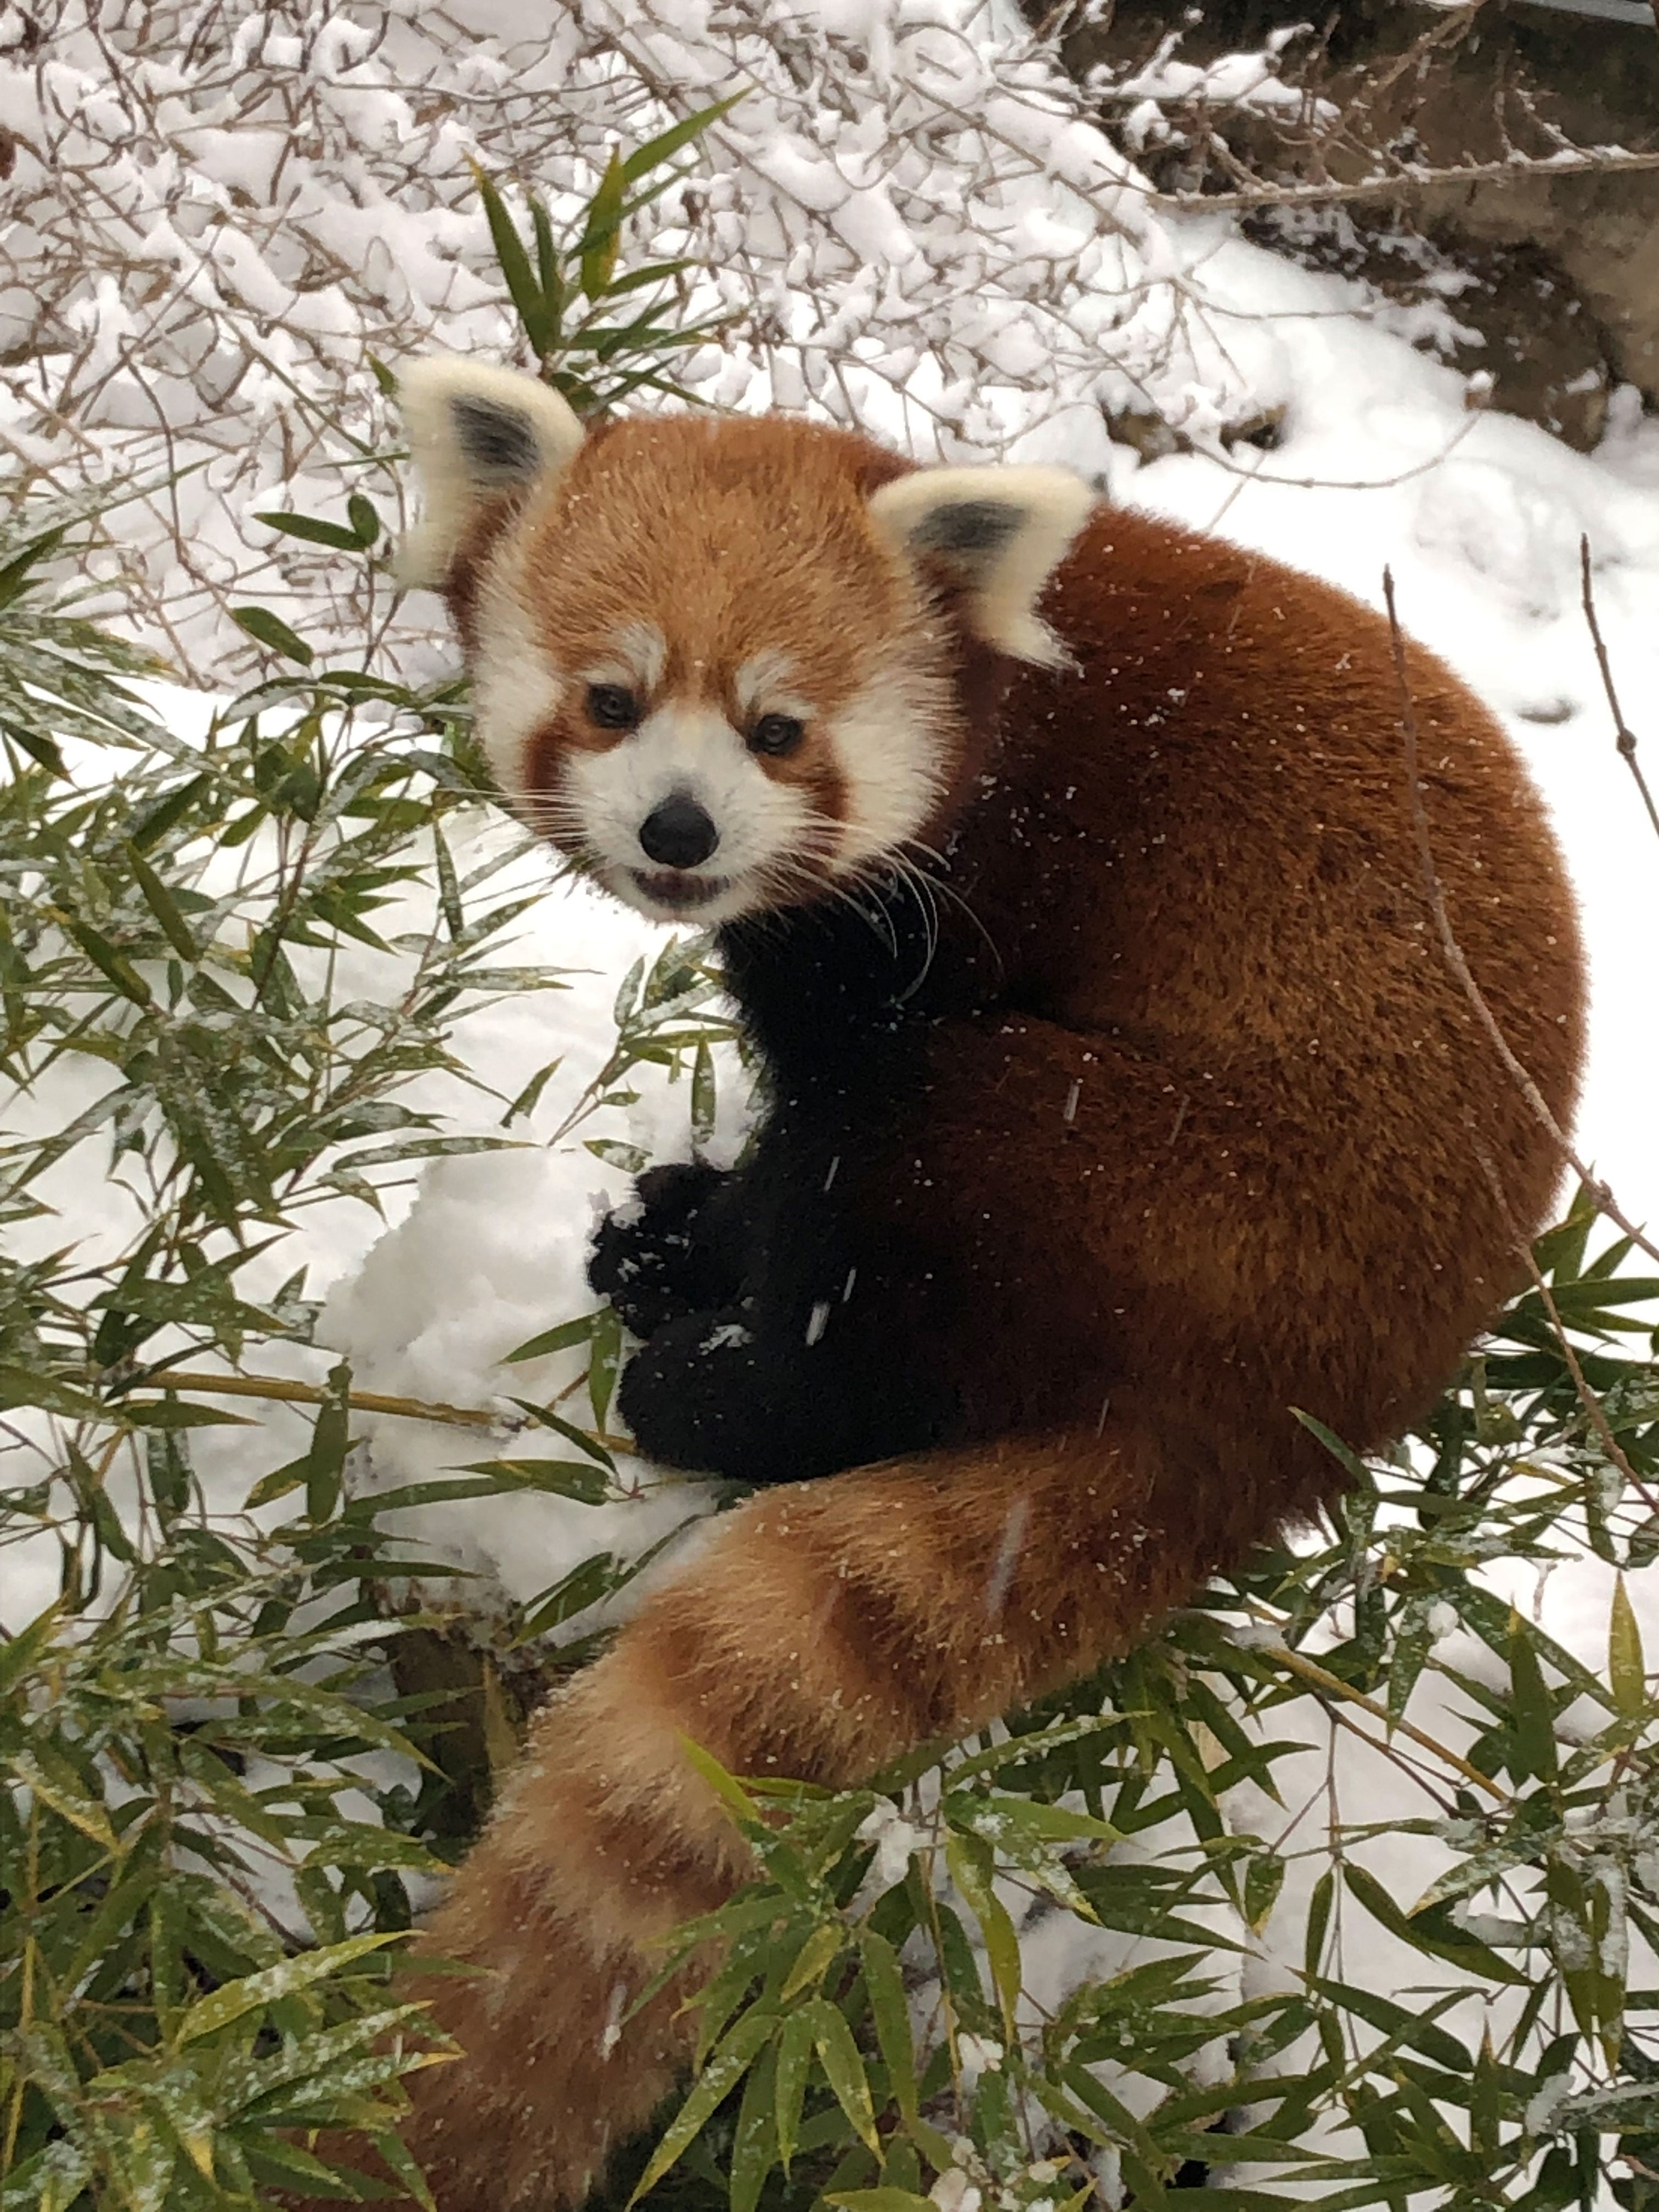 A red panda in the snow with bamboo